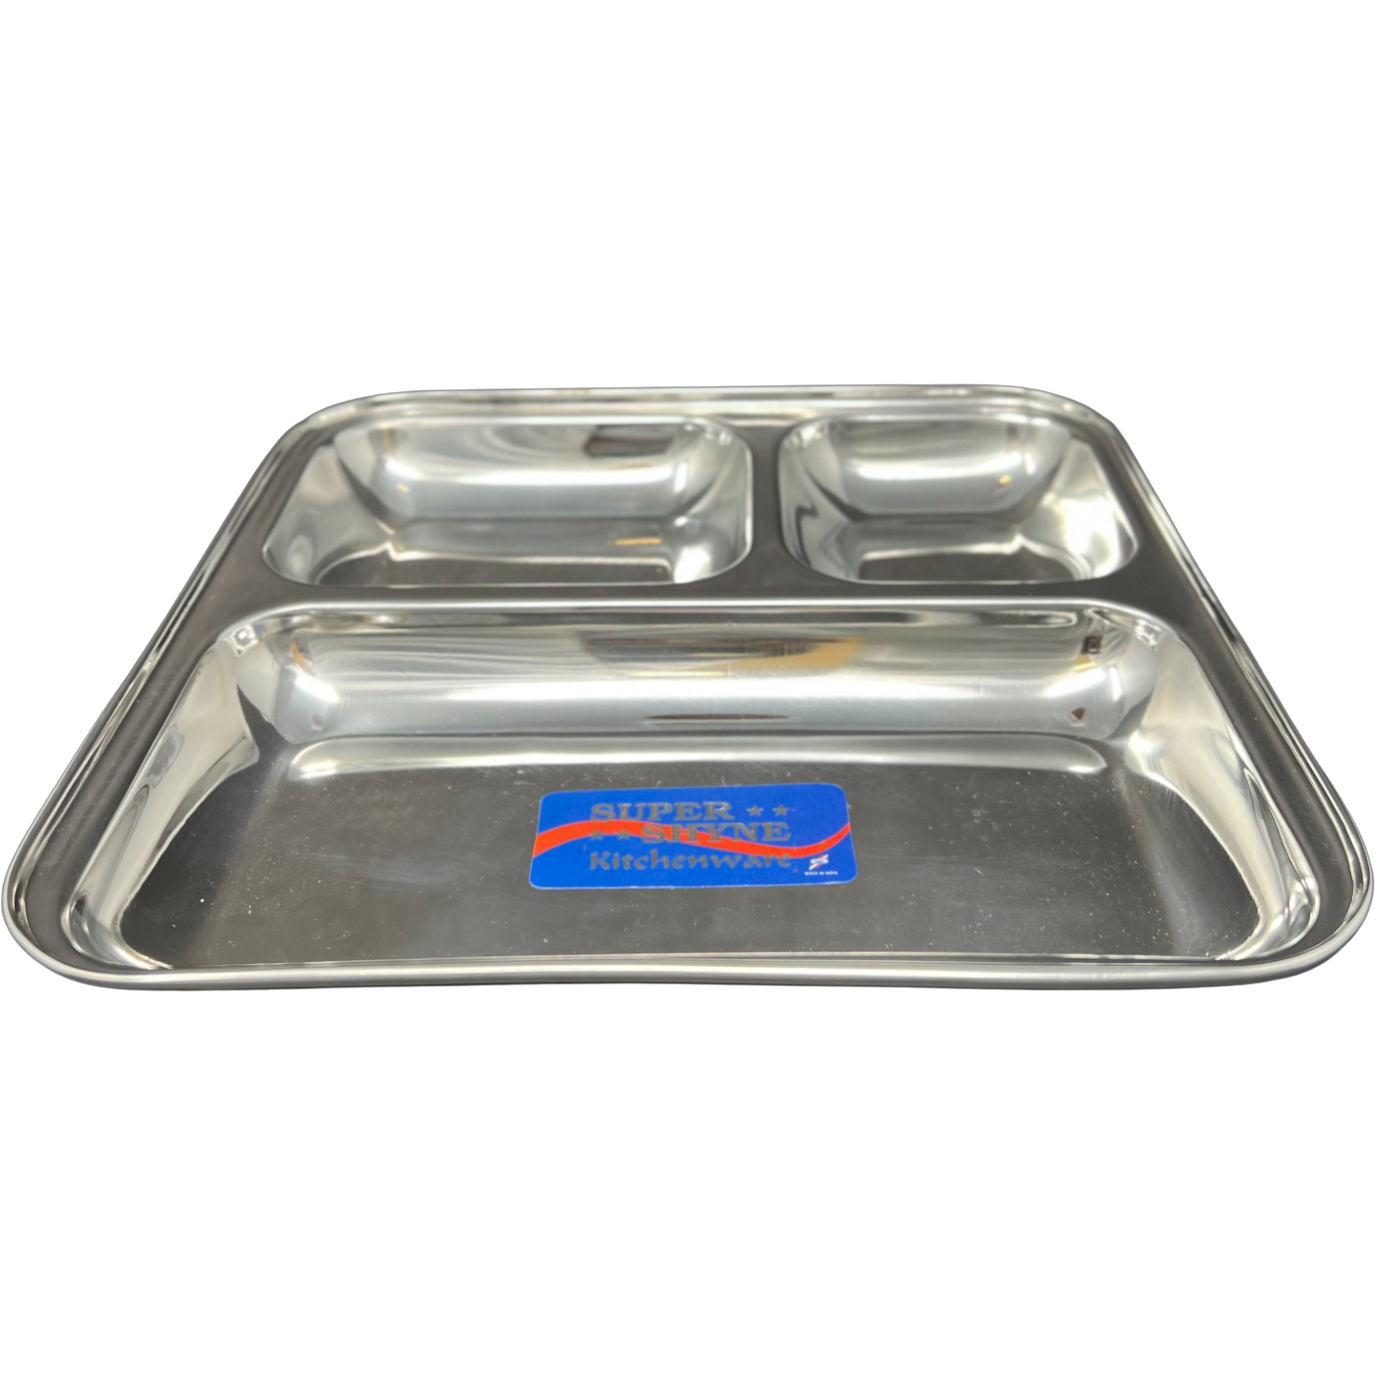 Case of 6 - Super Shyne Stainless Steel 3 Section Square Lunch Tray - 9.5 In